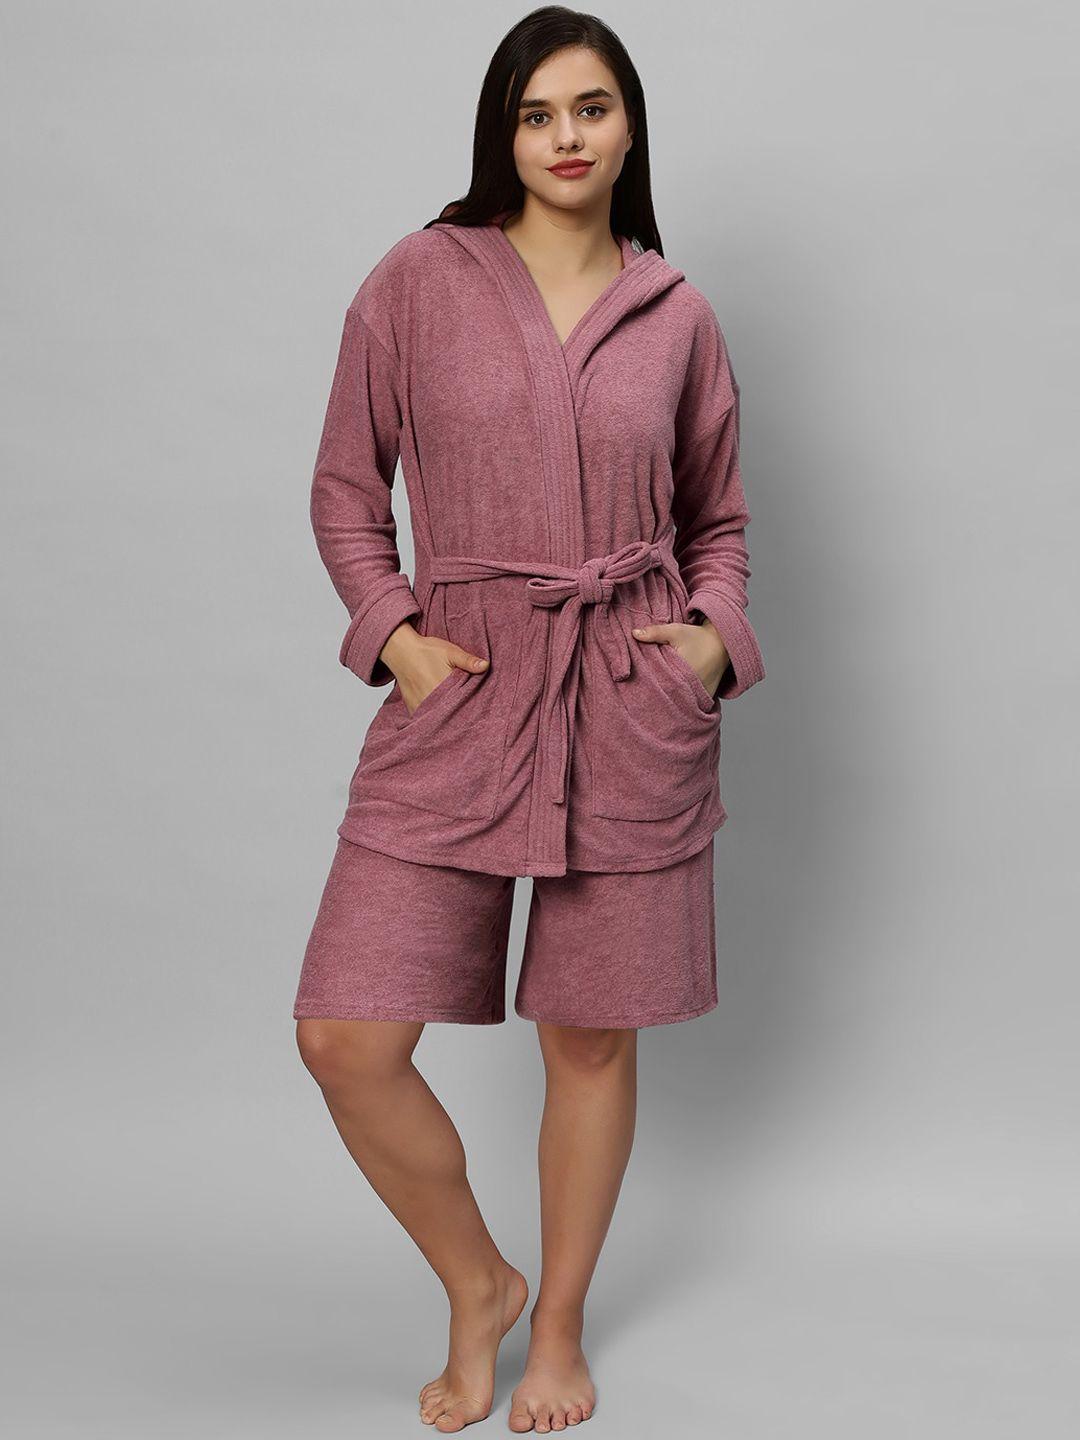 lacylook women hooded solid bathrobe with shorts set